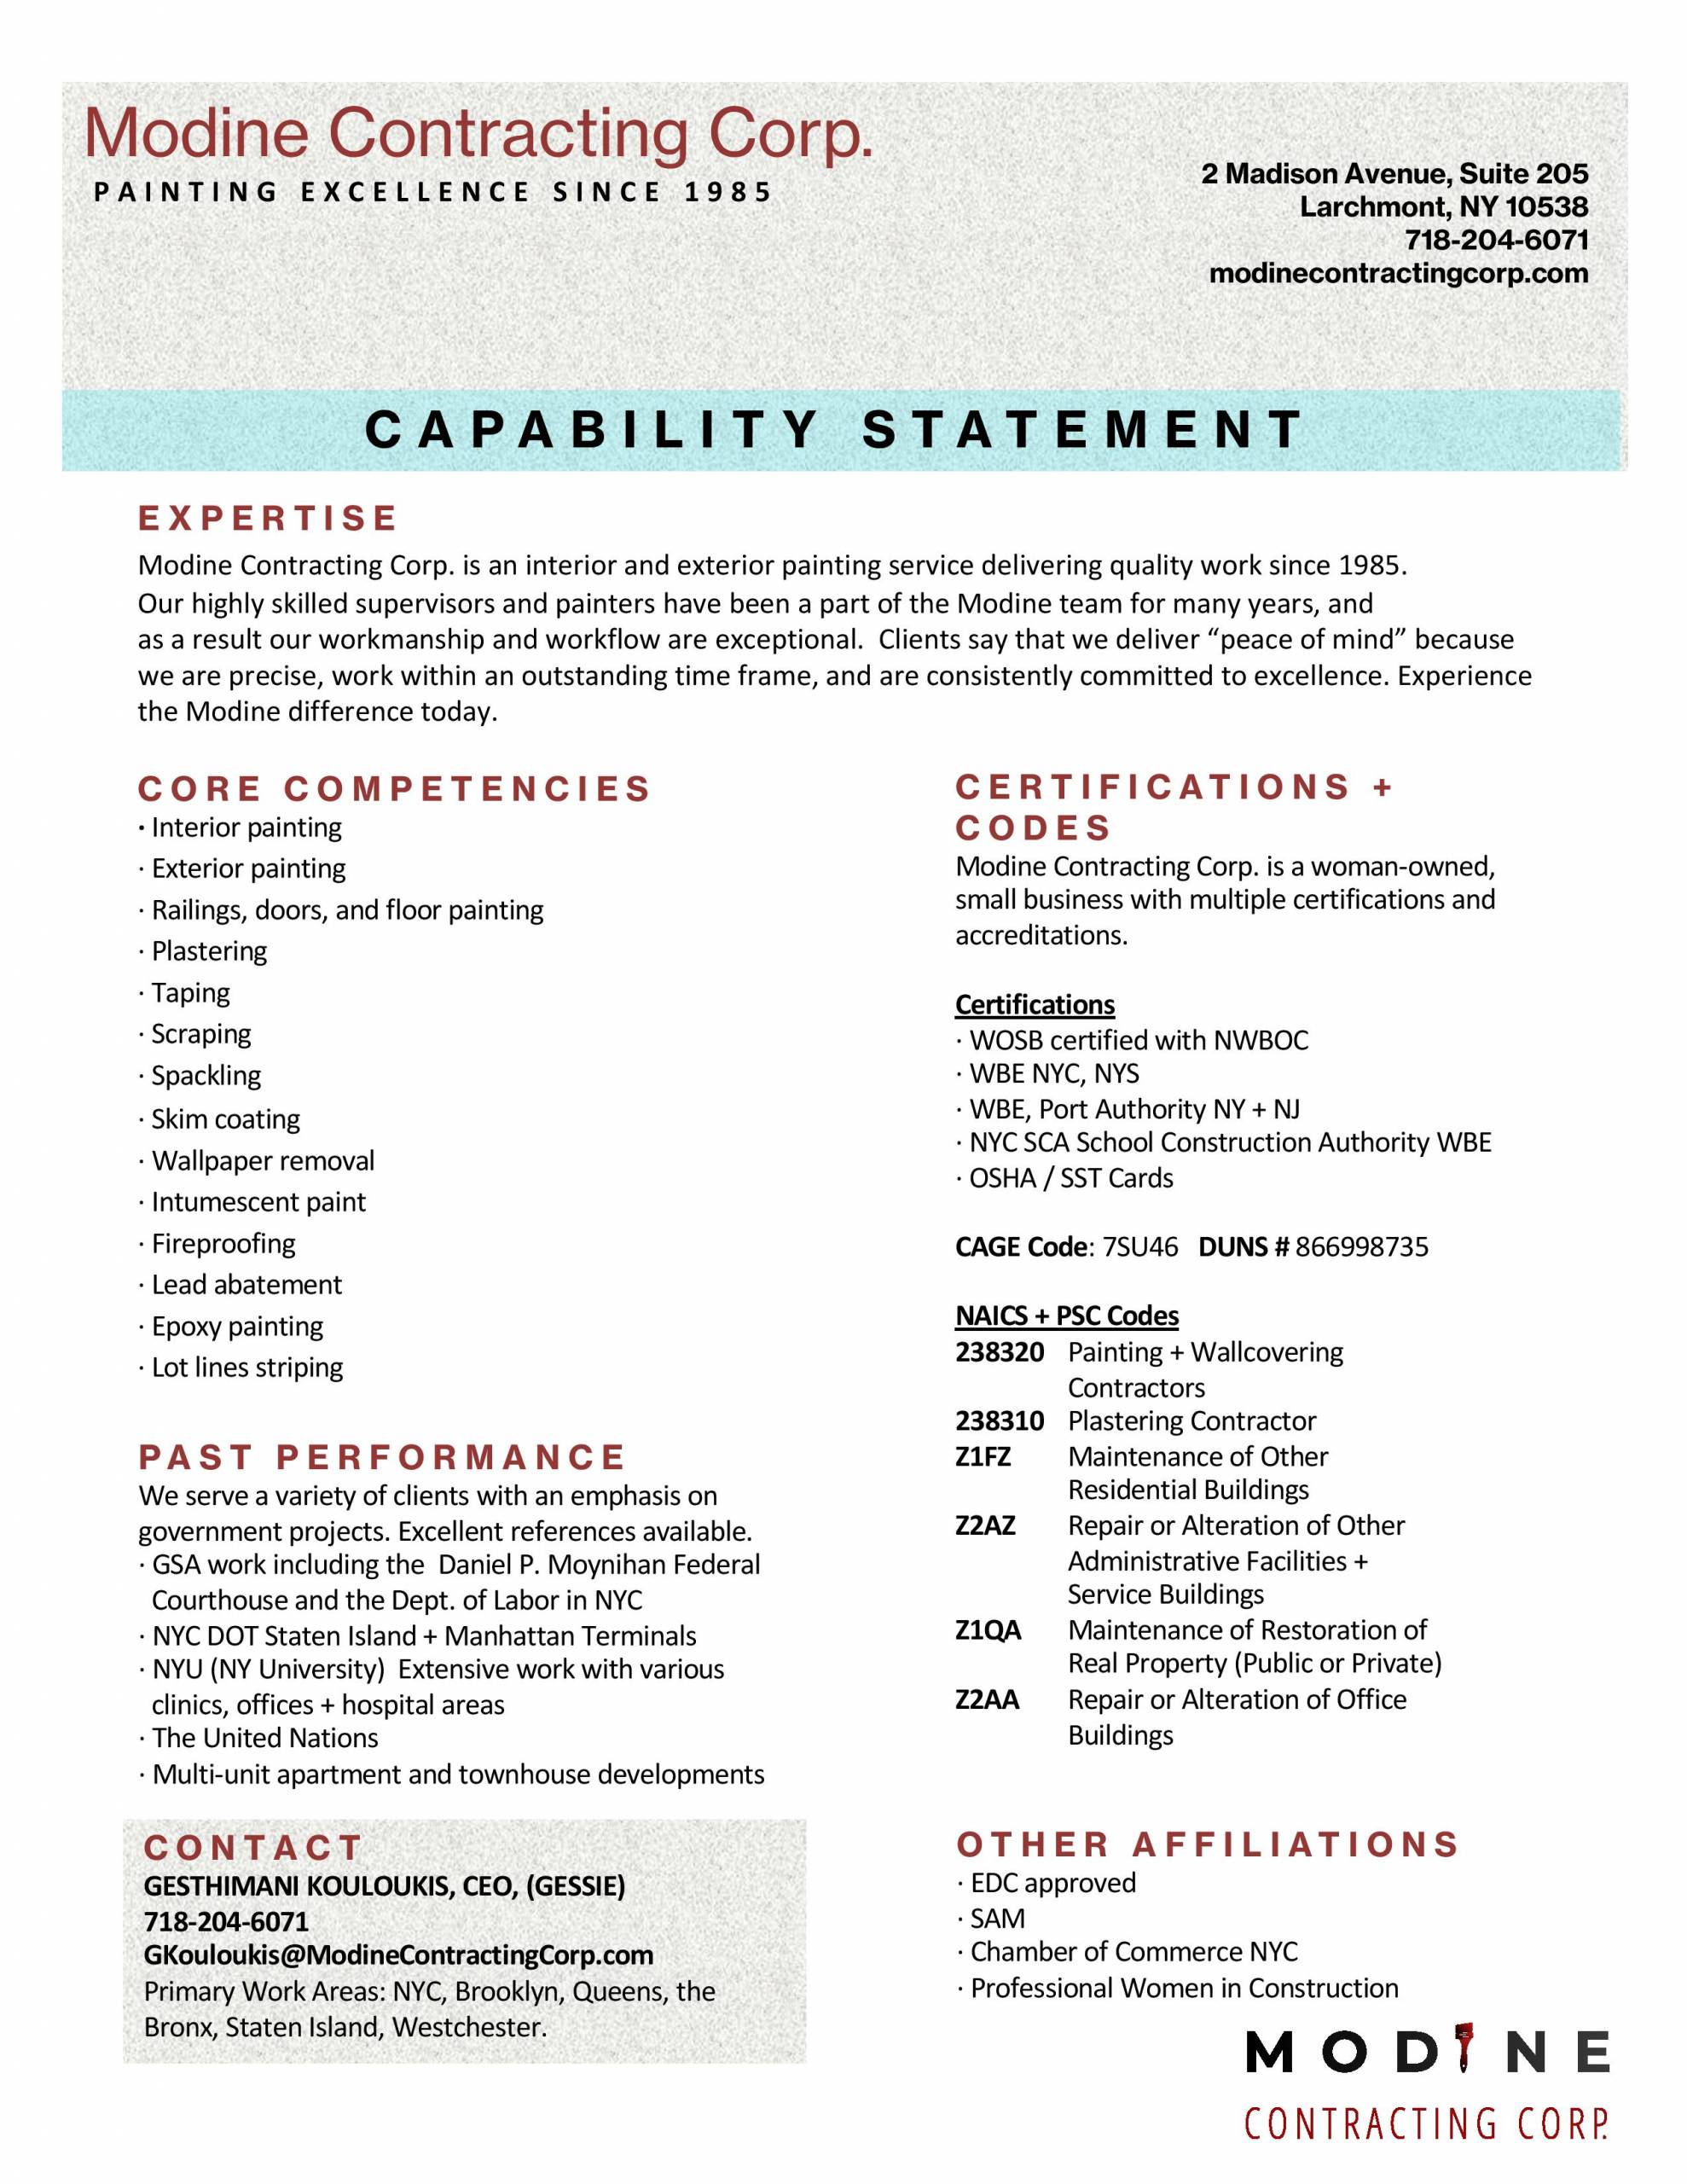 Capability Statement Modine Contracting Corp